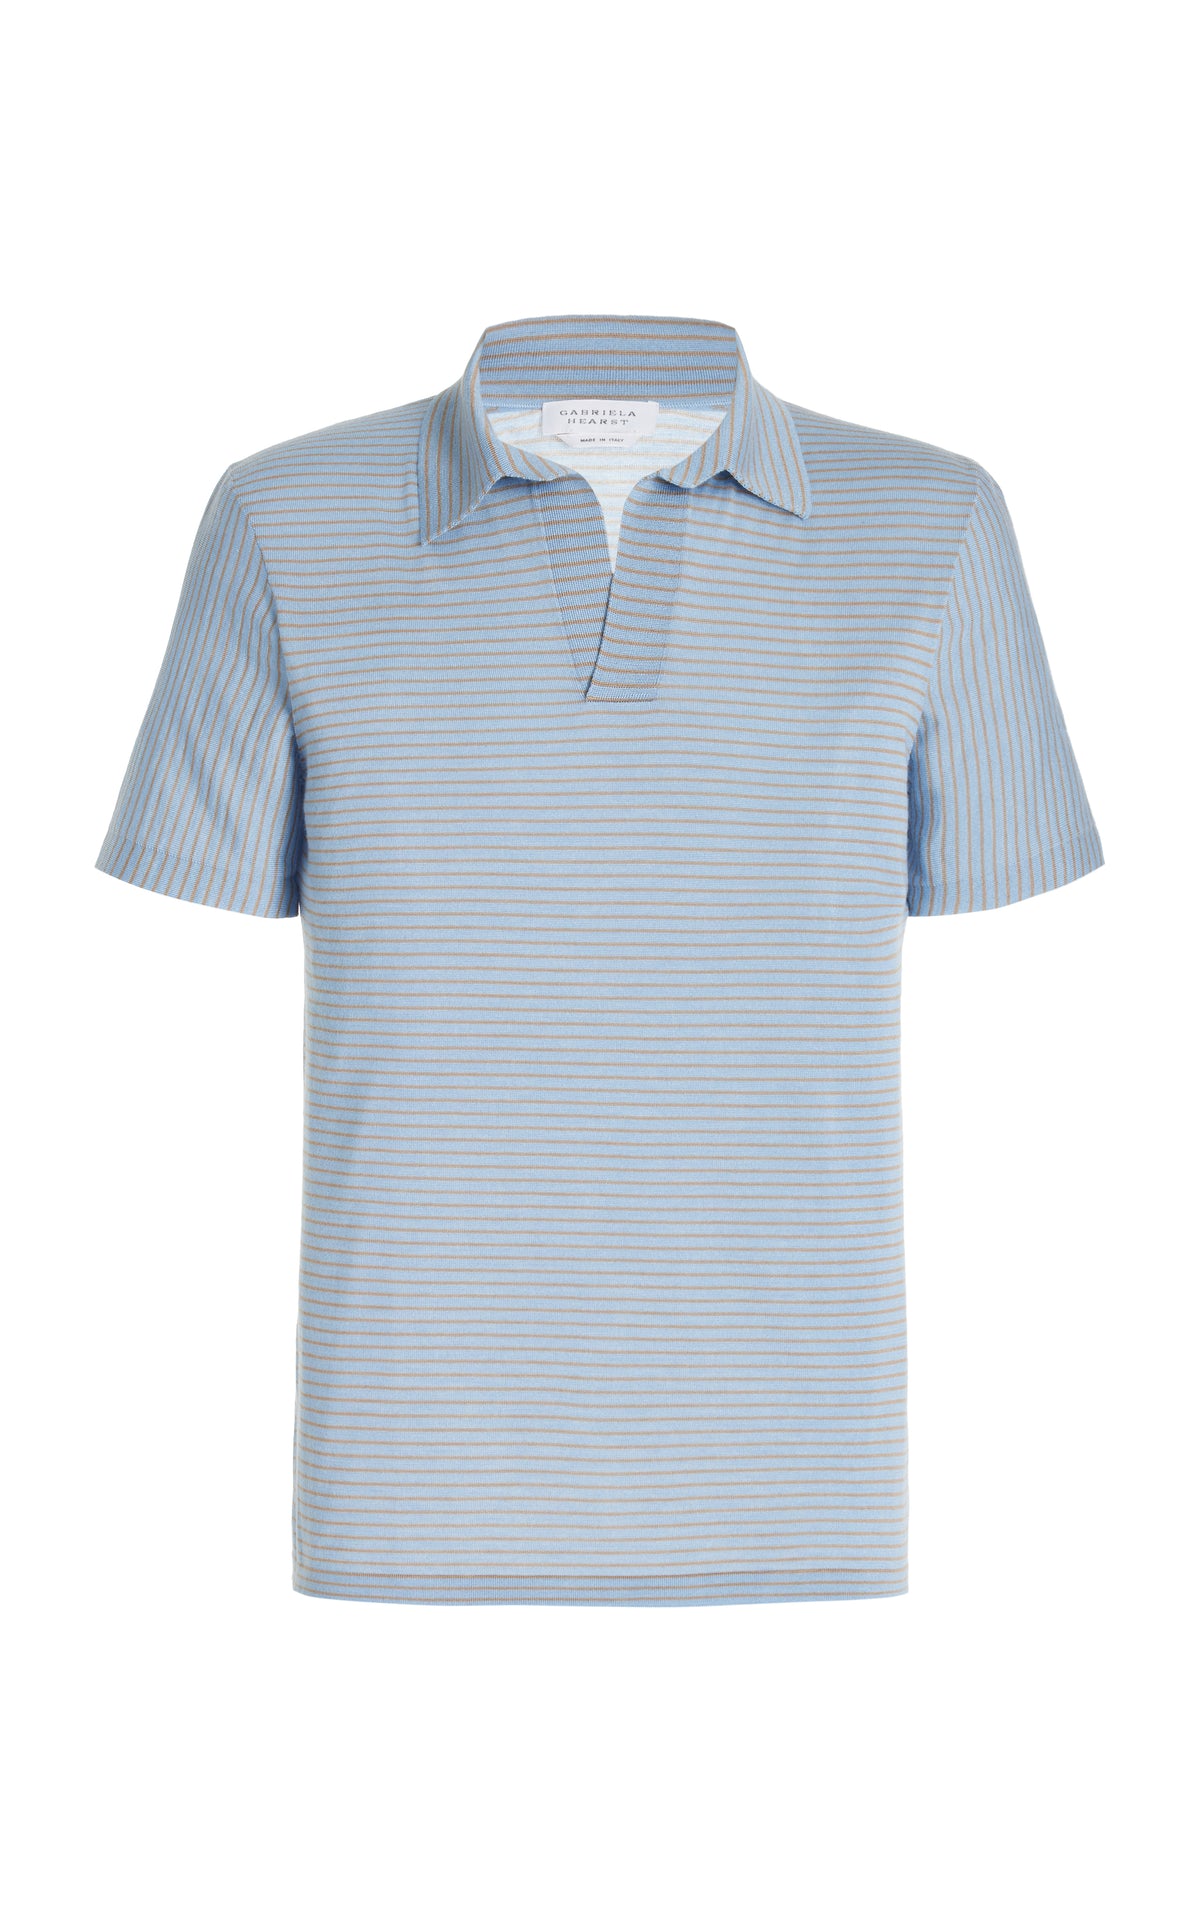 Stendhal Knit Short Sleeve Polo in Halogen Blue & Camel Cashmere